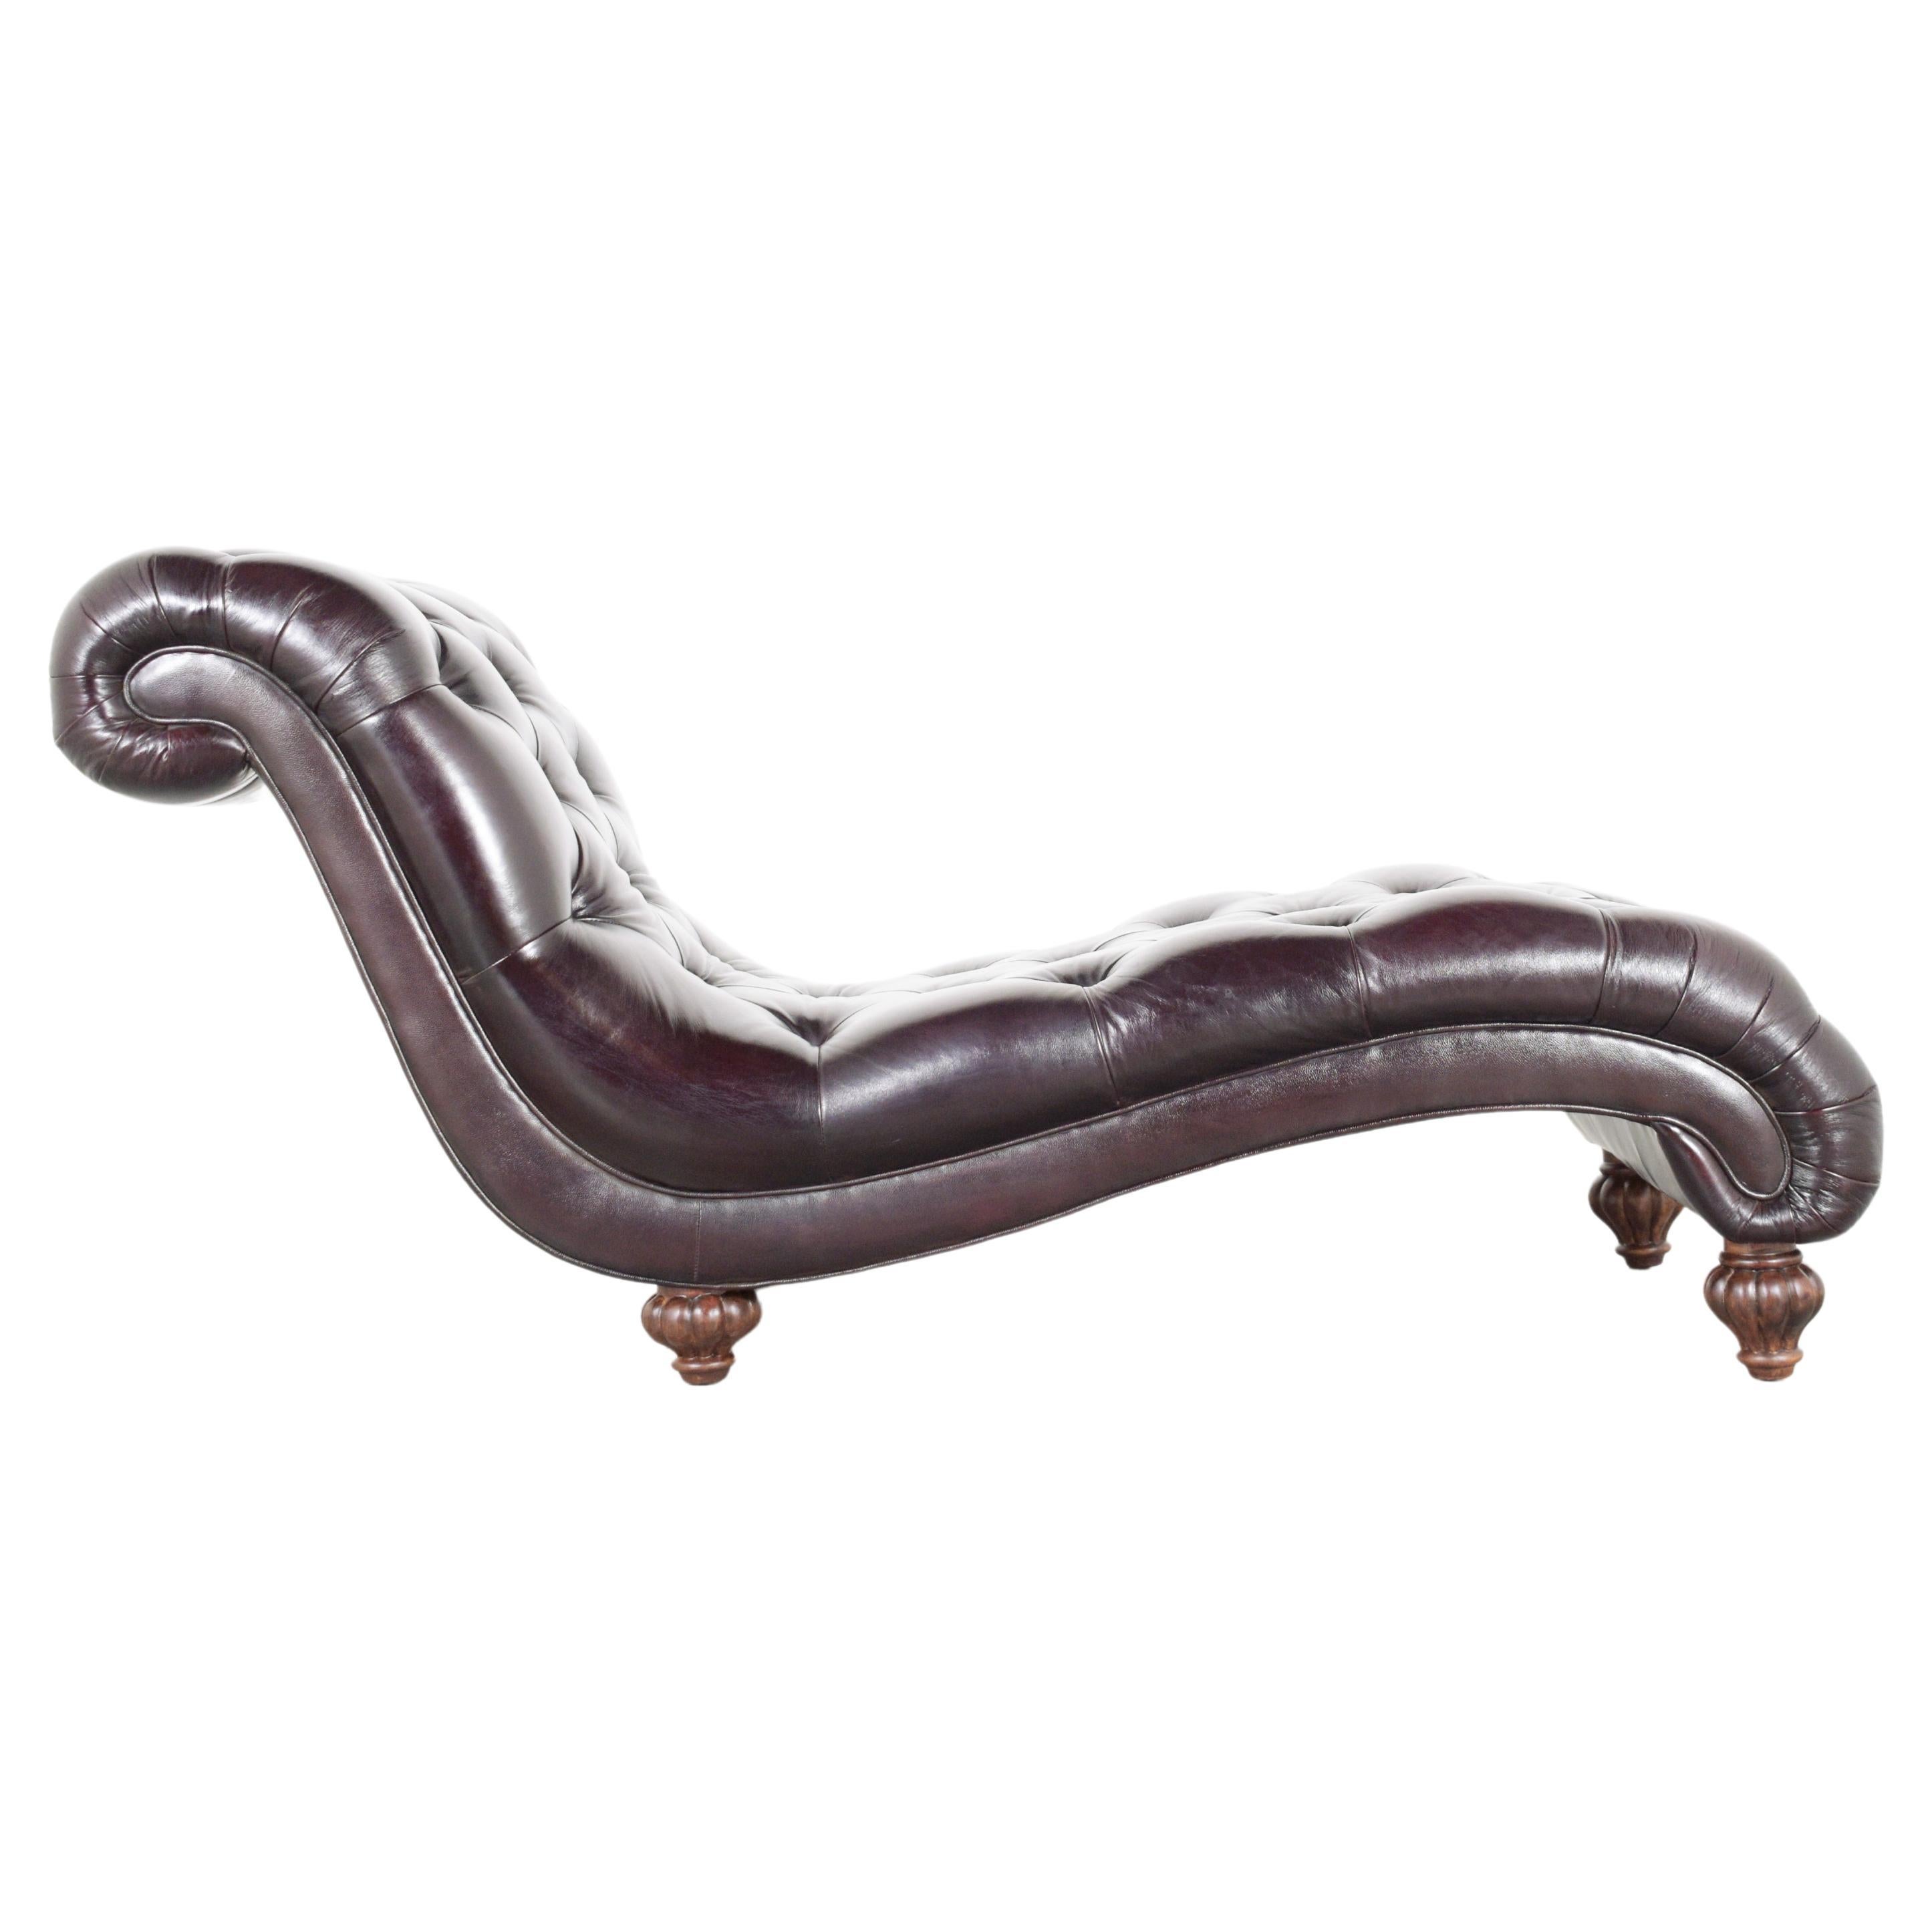 Evoke a sense of classic luxury with our restored Vintage 1980s Chesterfield Chaise Lounge, an epitome of traditional elegance combined with modern comfort. Handcrafted with precision, this leather daybed is not just a piece of furniture but a